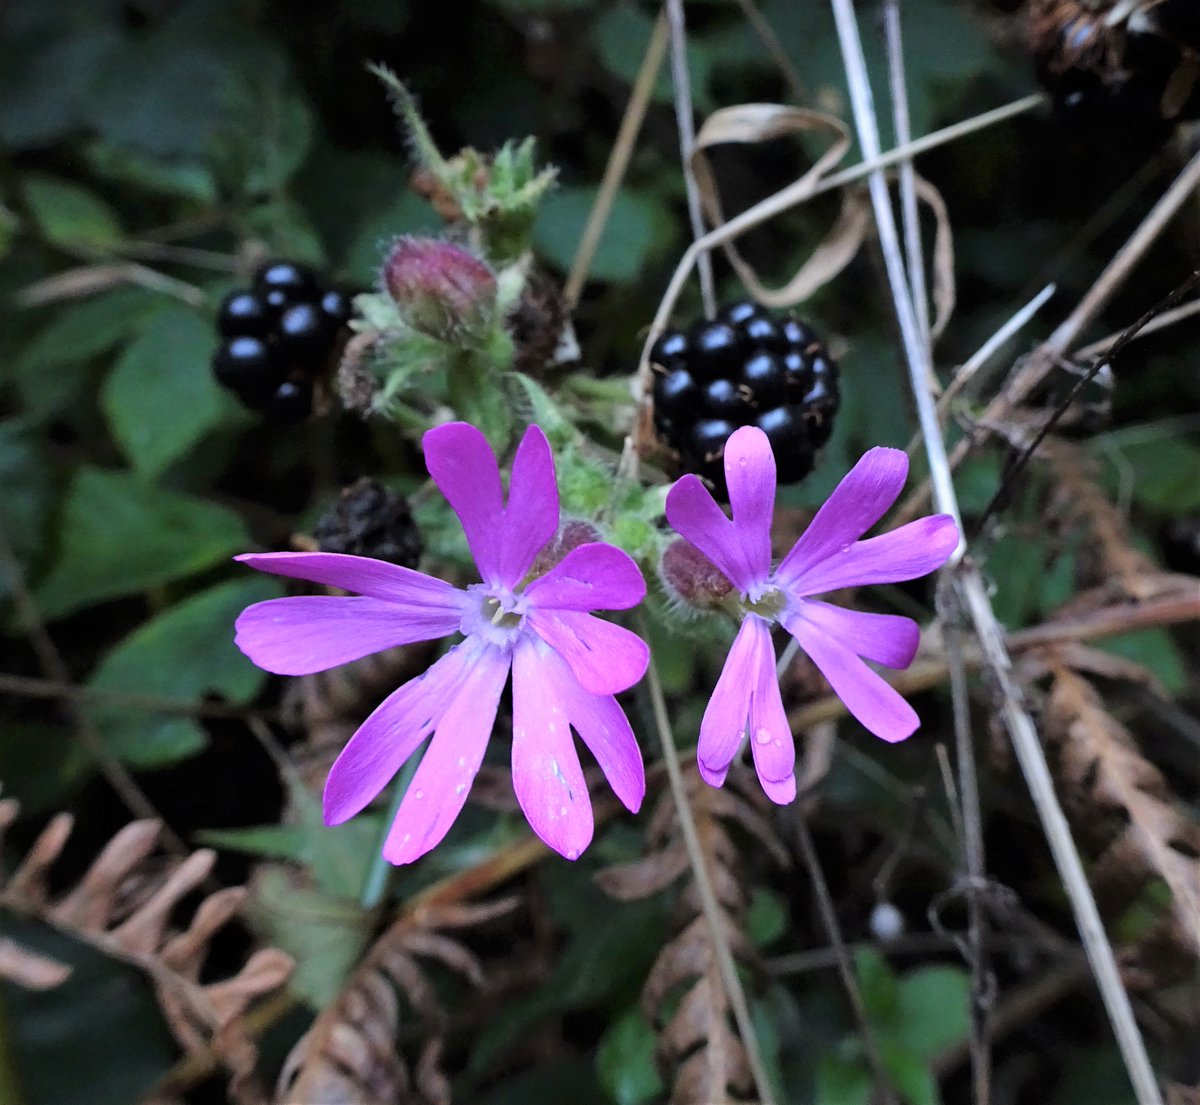 In the early evening shadows along the river path a couple of Red Campion flowers among brambles and ferns #WildFlowerHour #Redcampion #Wildflowers #Exmoor